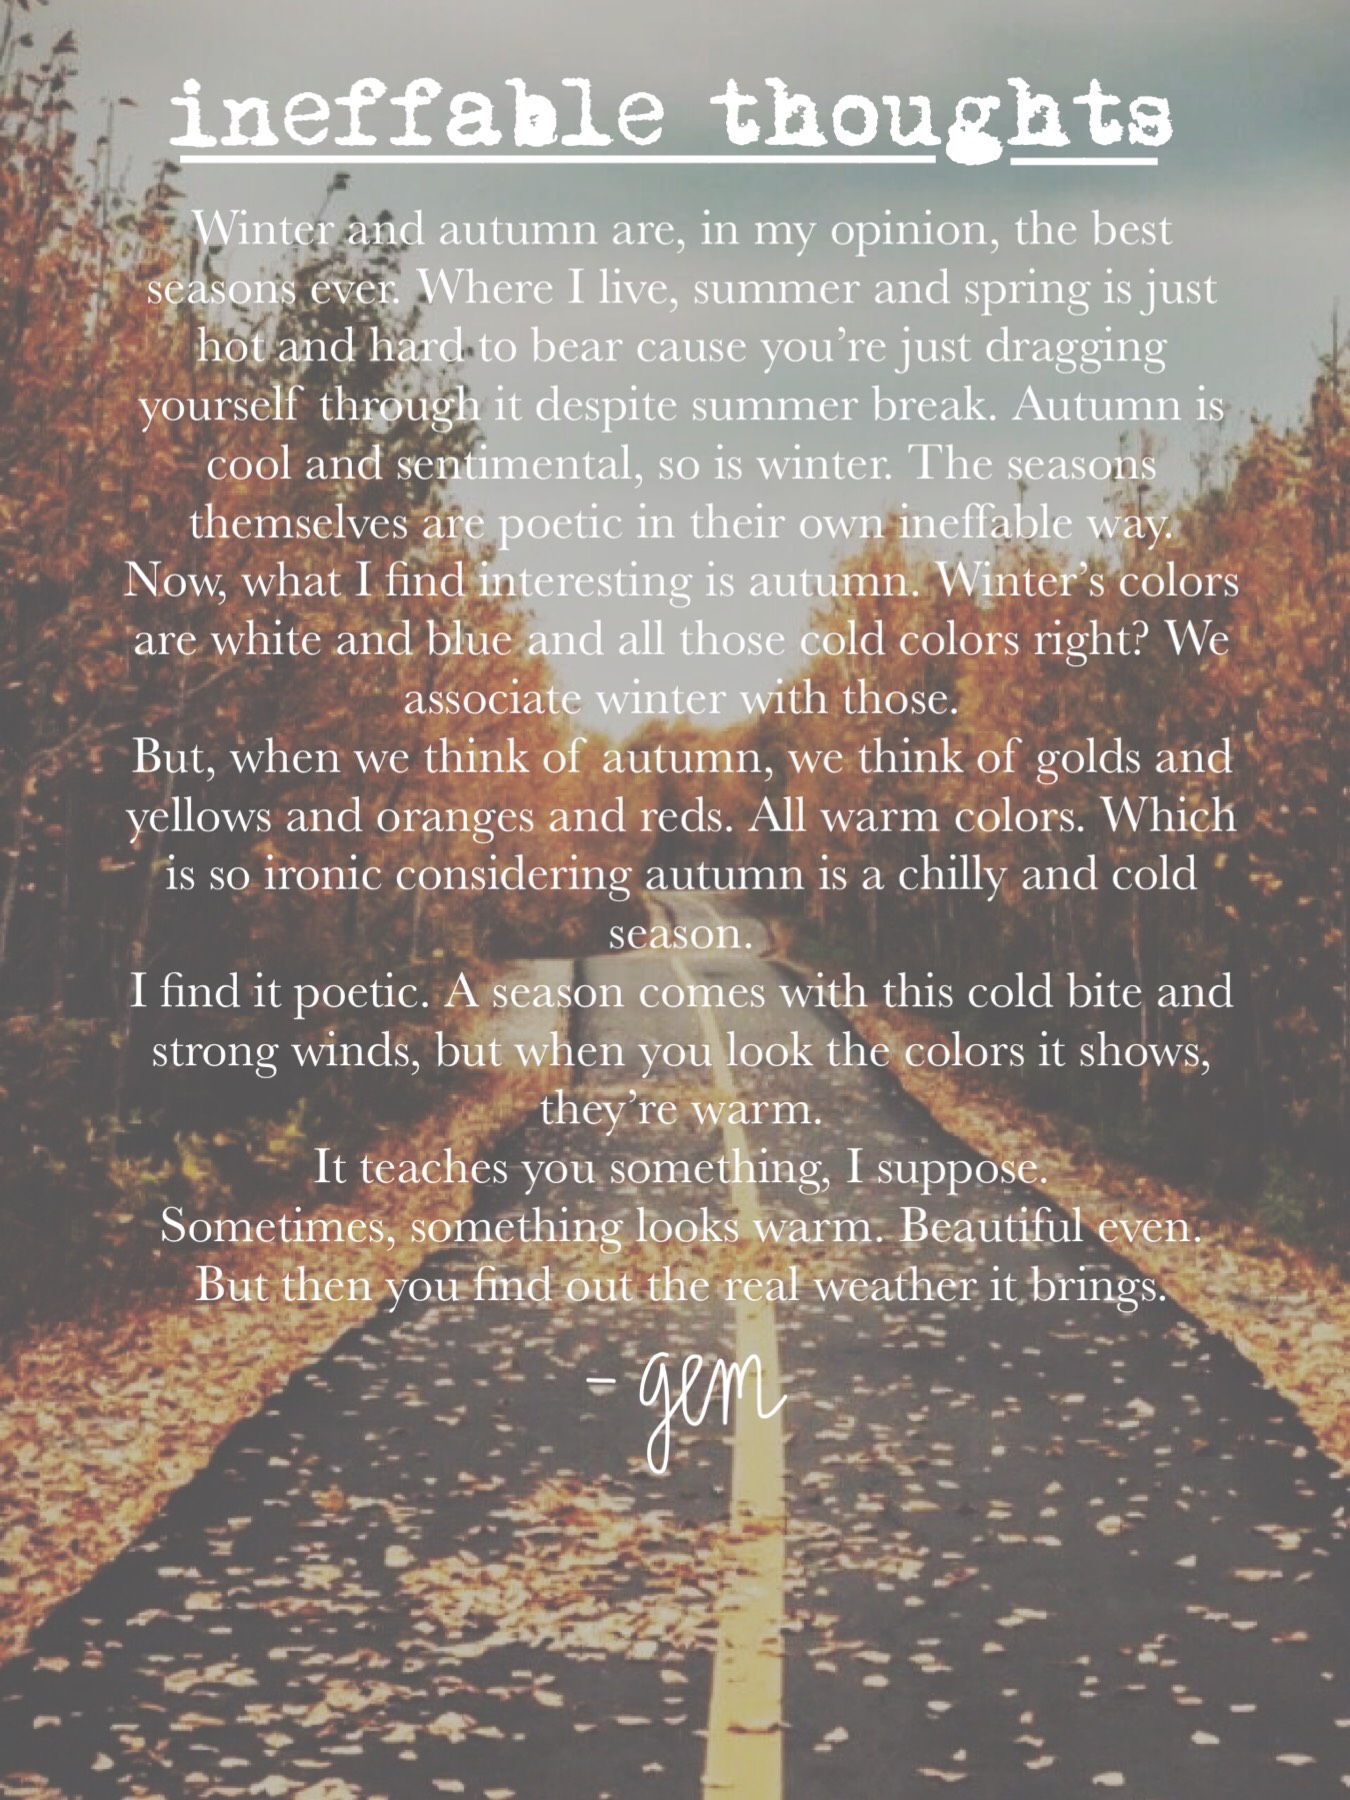 “🍂tap🍂”
Another ineffable thoughts for u all. It’s just a thought that came to me in the middle of the morning so I thought I’d put it down in words. sending fall vibes and love~❤️